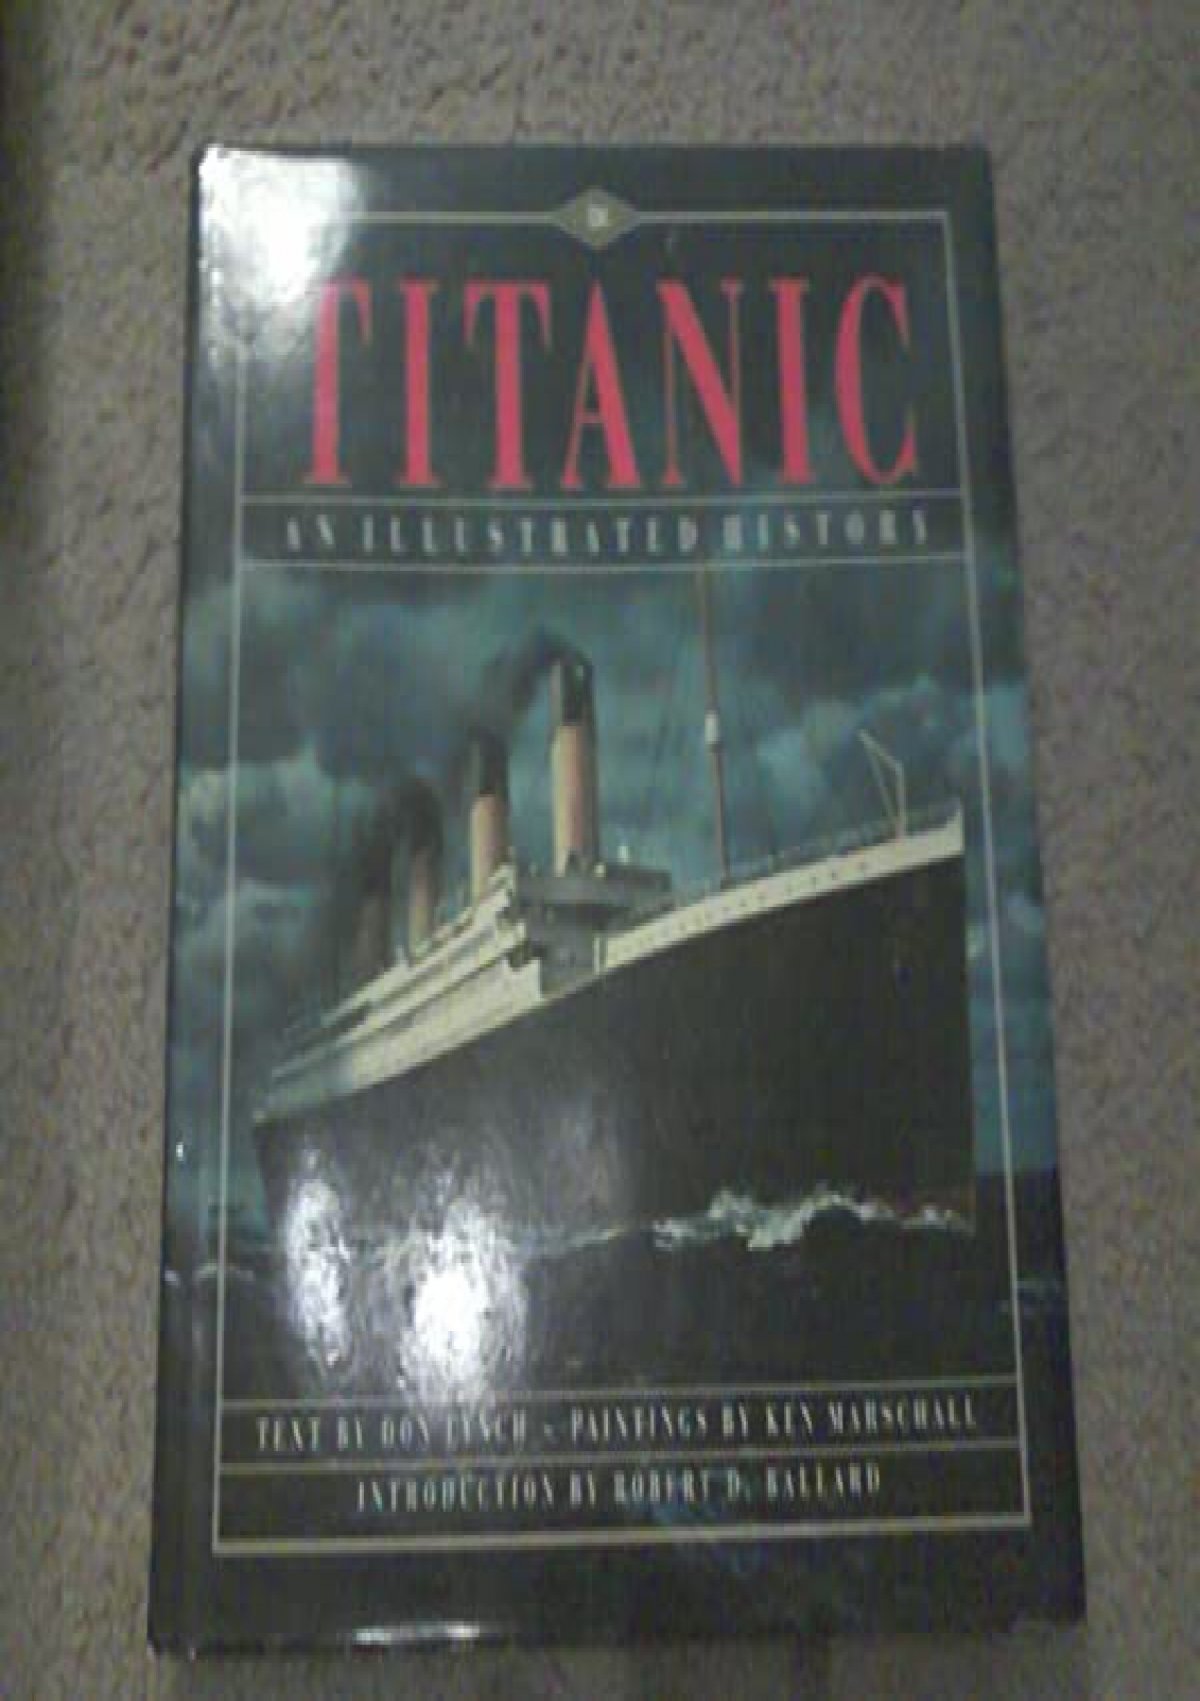 titanic an illustrated history pdf download